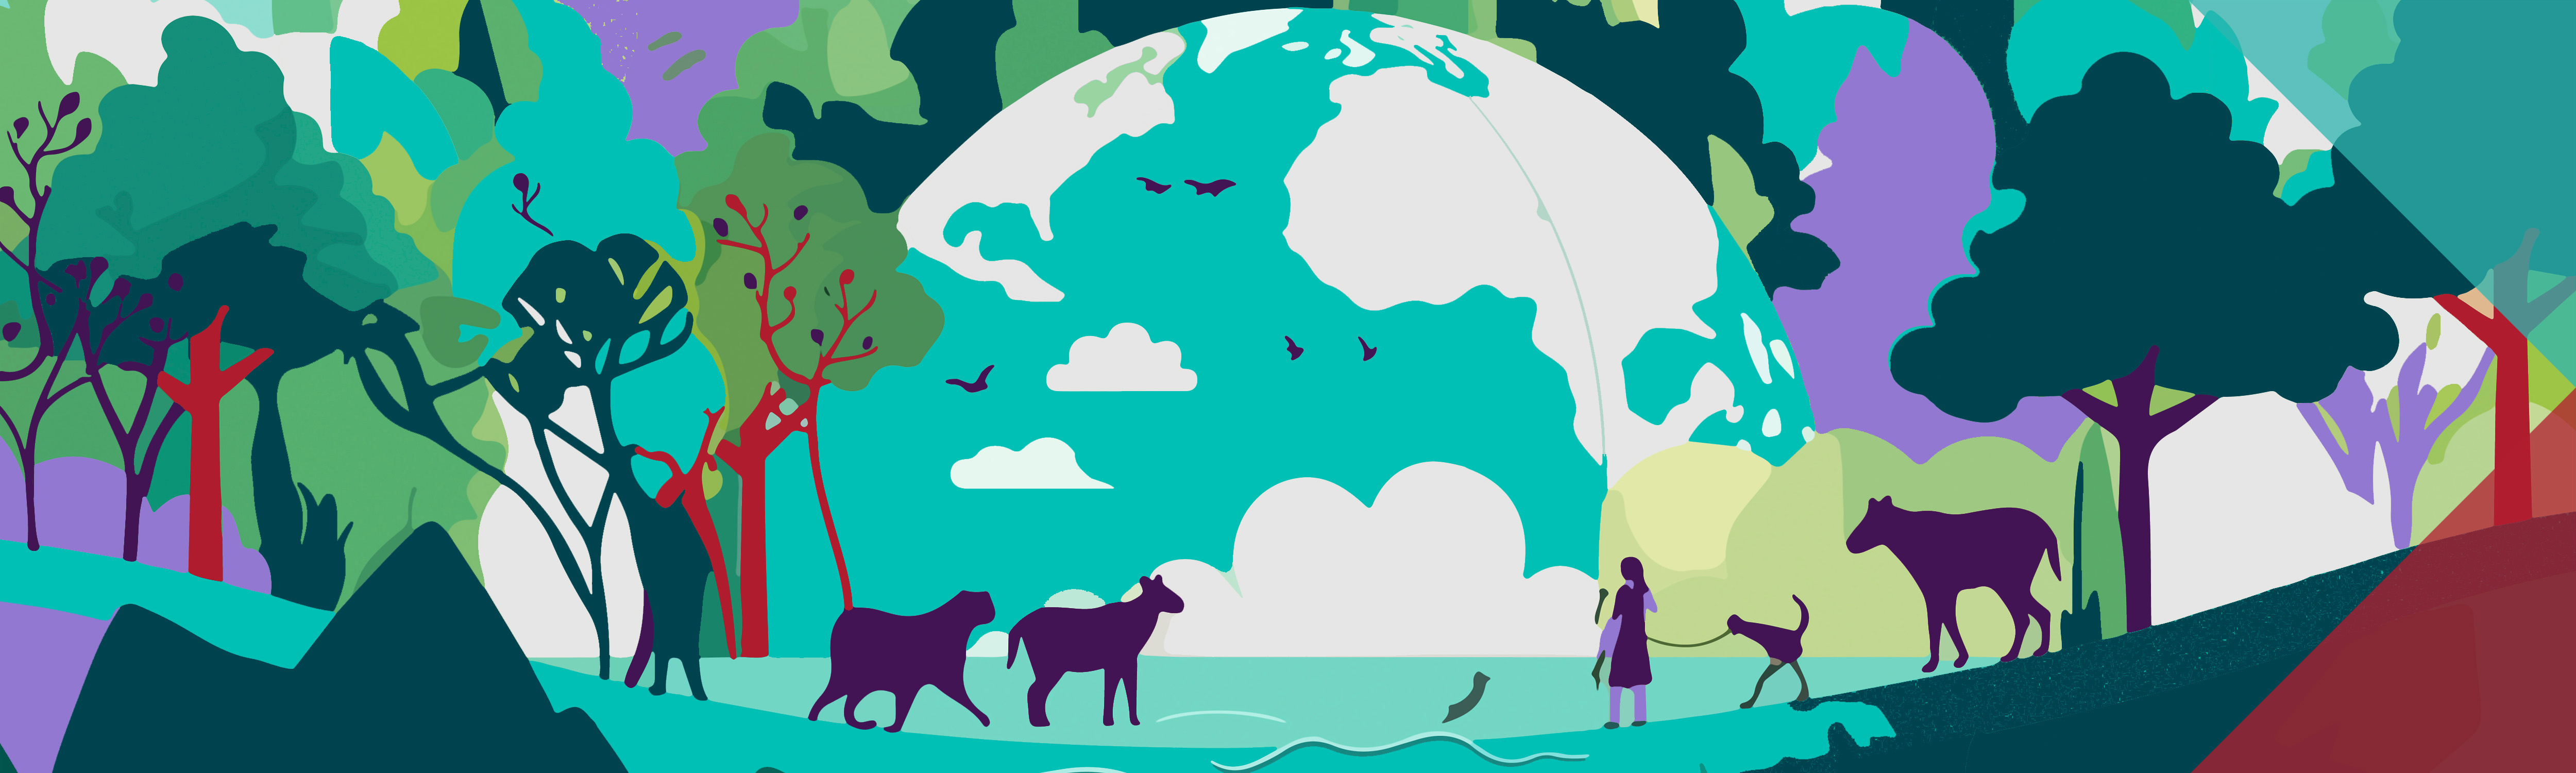 illustration of humans and animals standing in front of a world